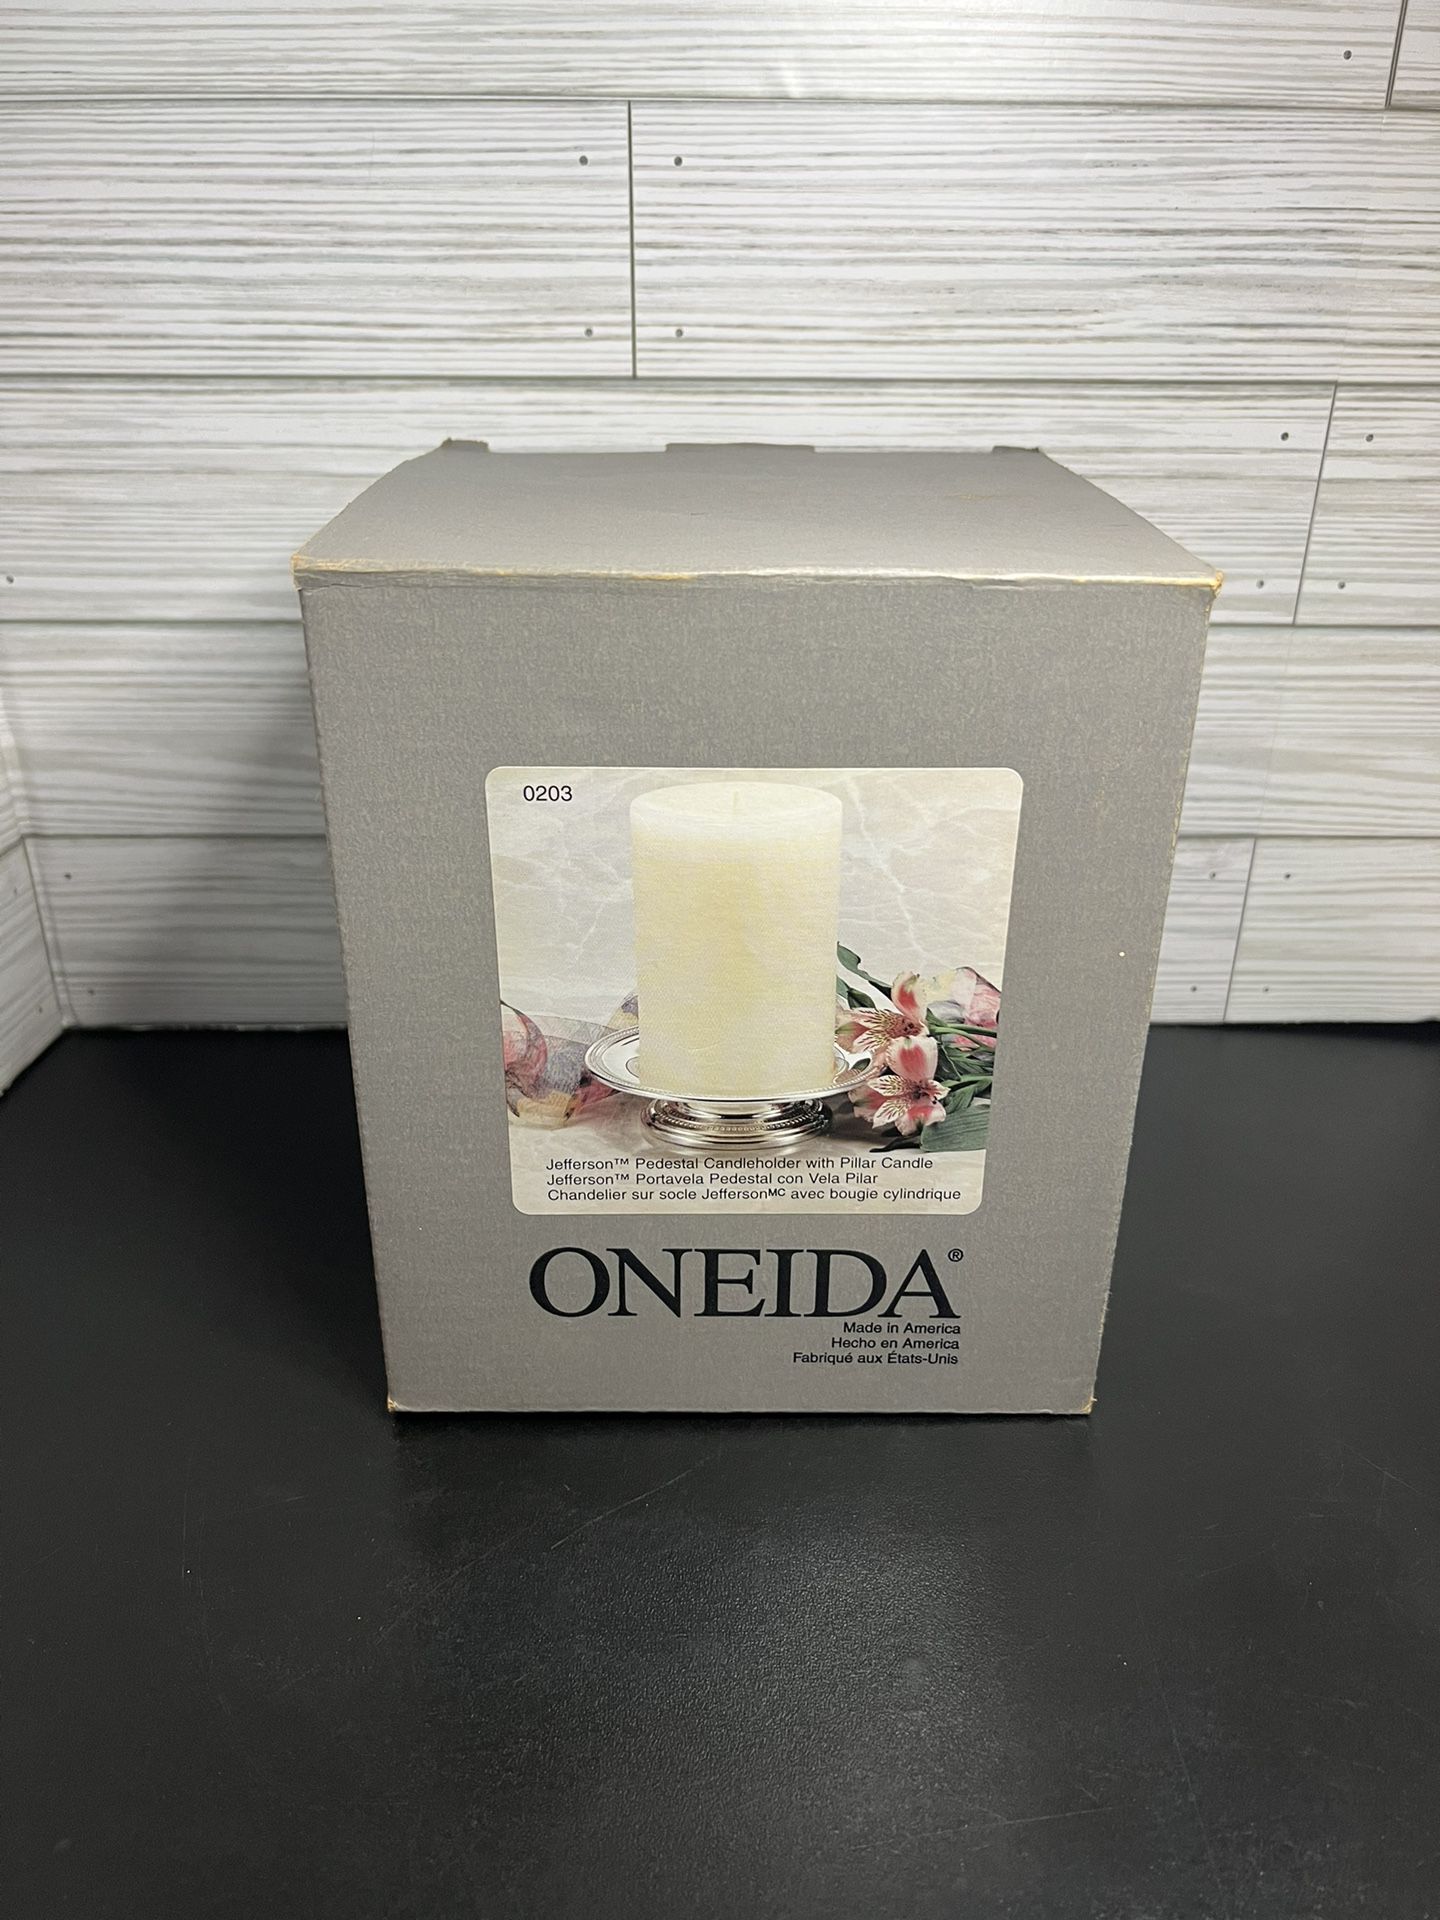 Oneida Silver Plated 1.5" Pedestal Candle Holder with Pillar Candle